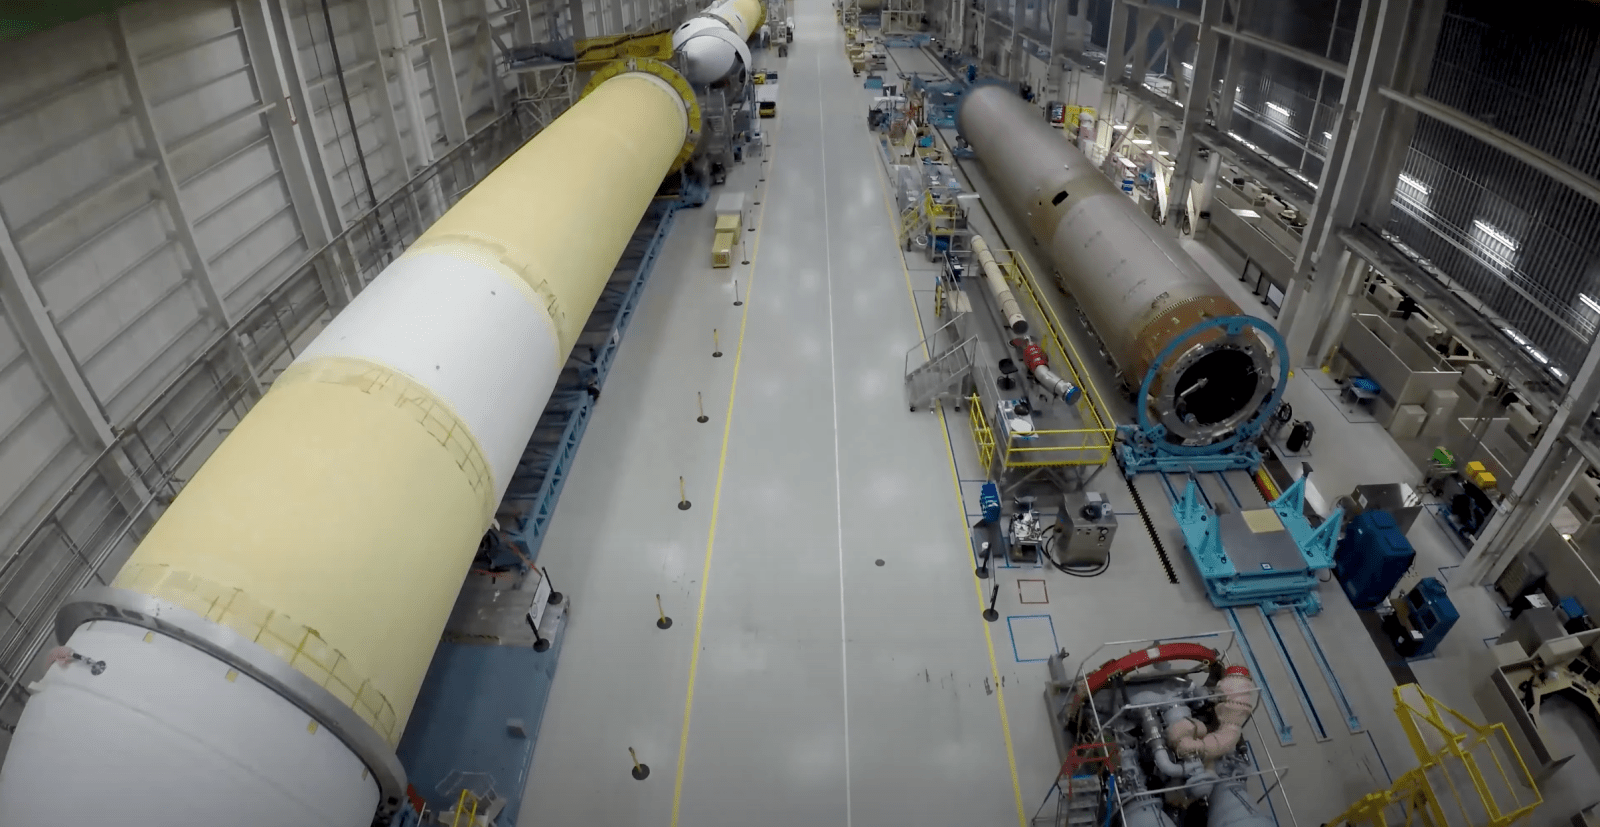 Take a look inside ULA's Rocket Factory in the company's latest video